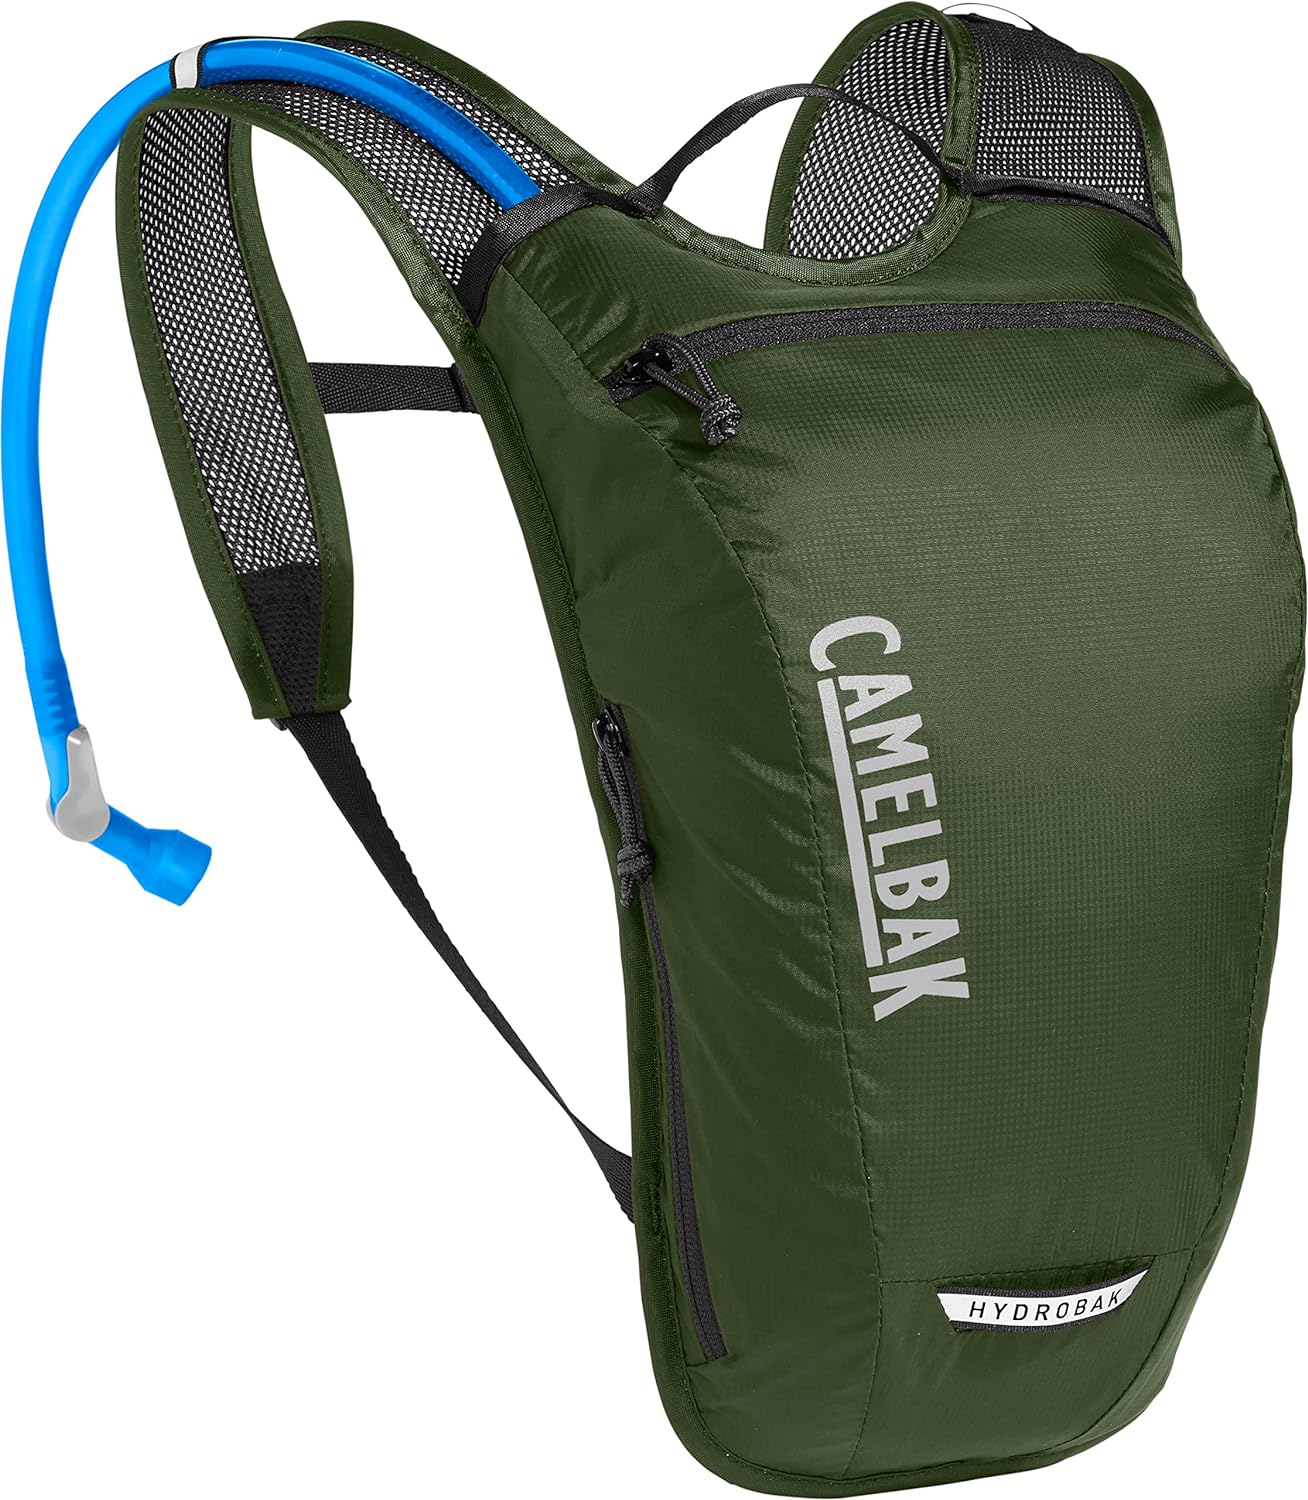 50-Oz CamelBak Hydrobak Light Bike Hydration Backpack 2 Colors $30 Free Shipping w/ Prime or on $35